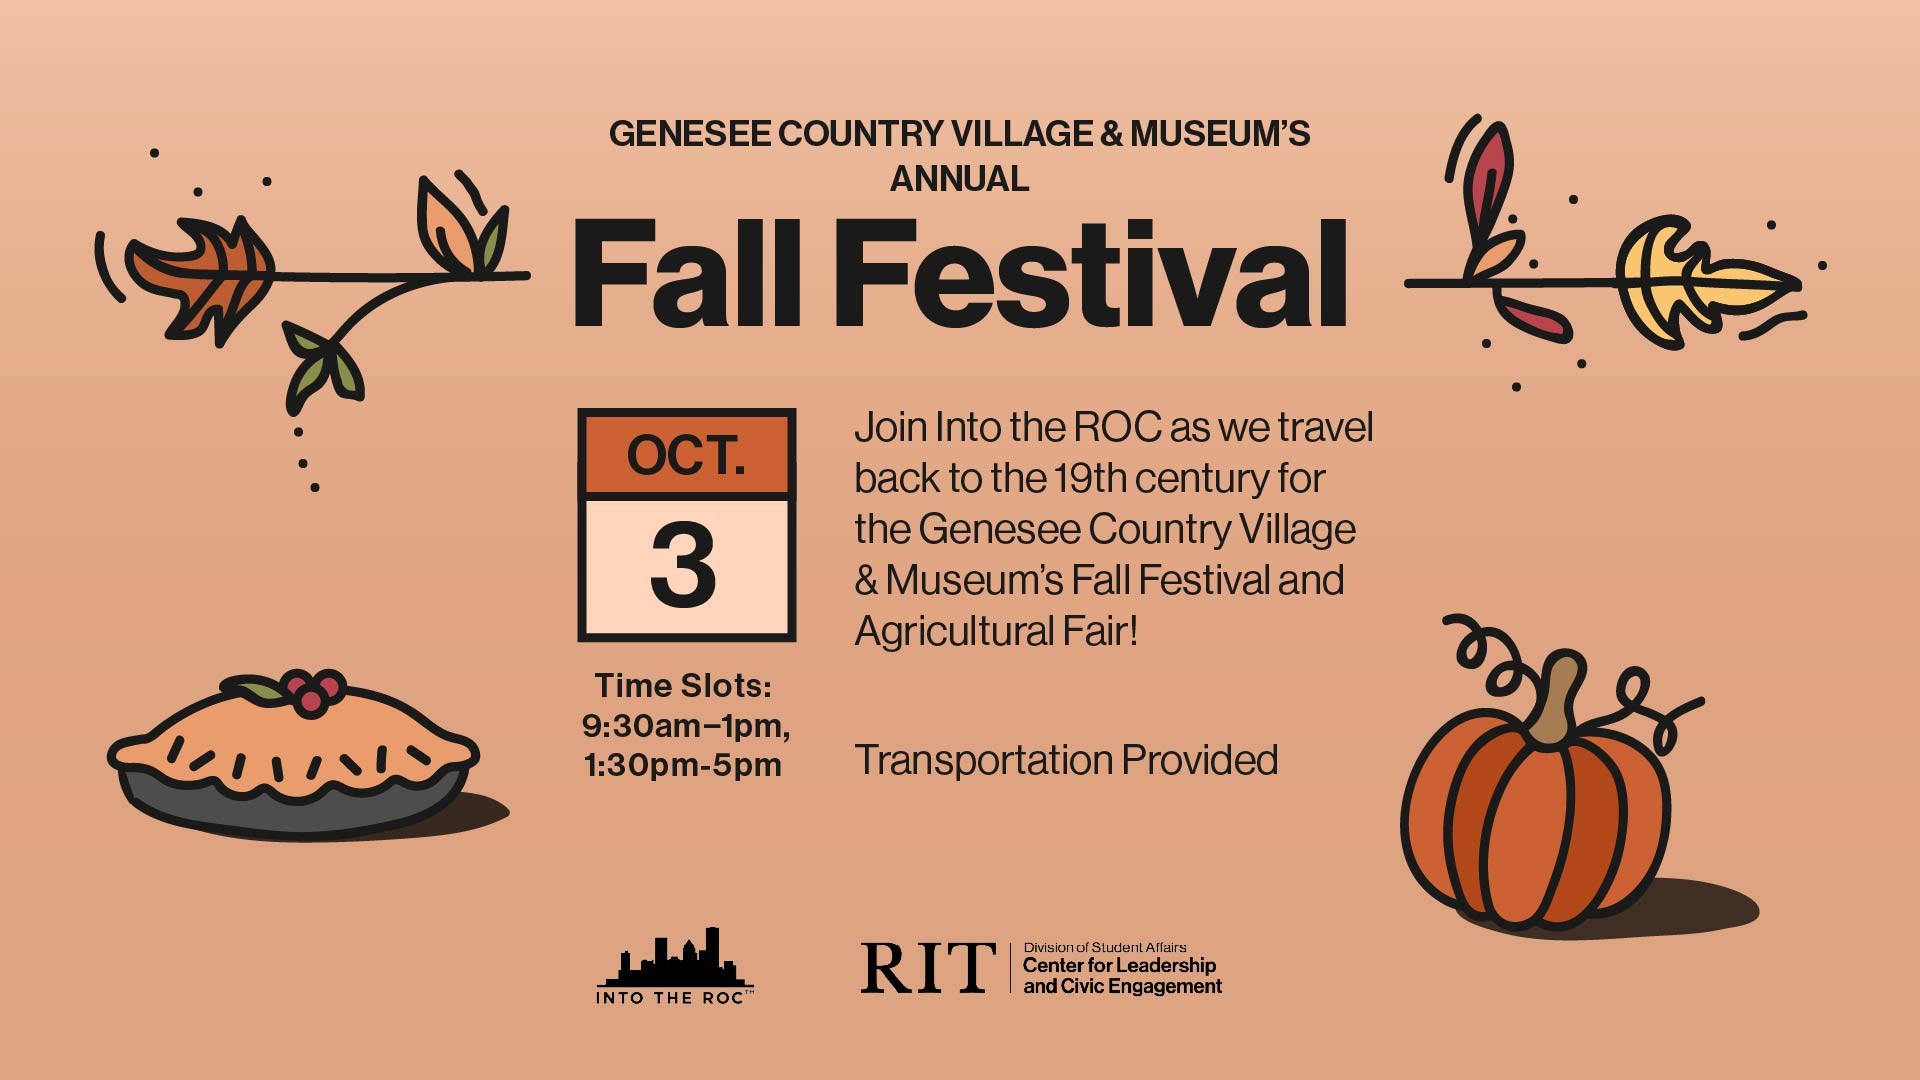 Genesee Country Village & Museum's Annual Fall Festival. Join Into the ROC as we travel back to the 19th century for the Genesee Country Village & Museum's Fall Festival and Agricultural Fair!